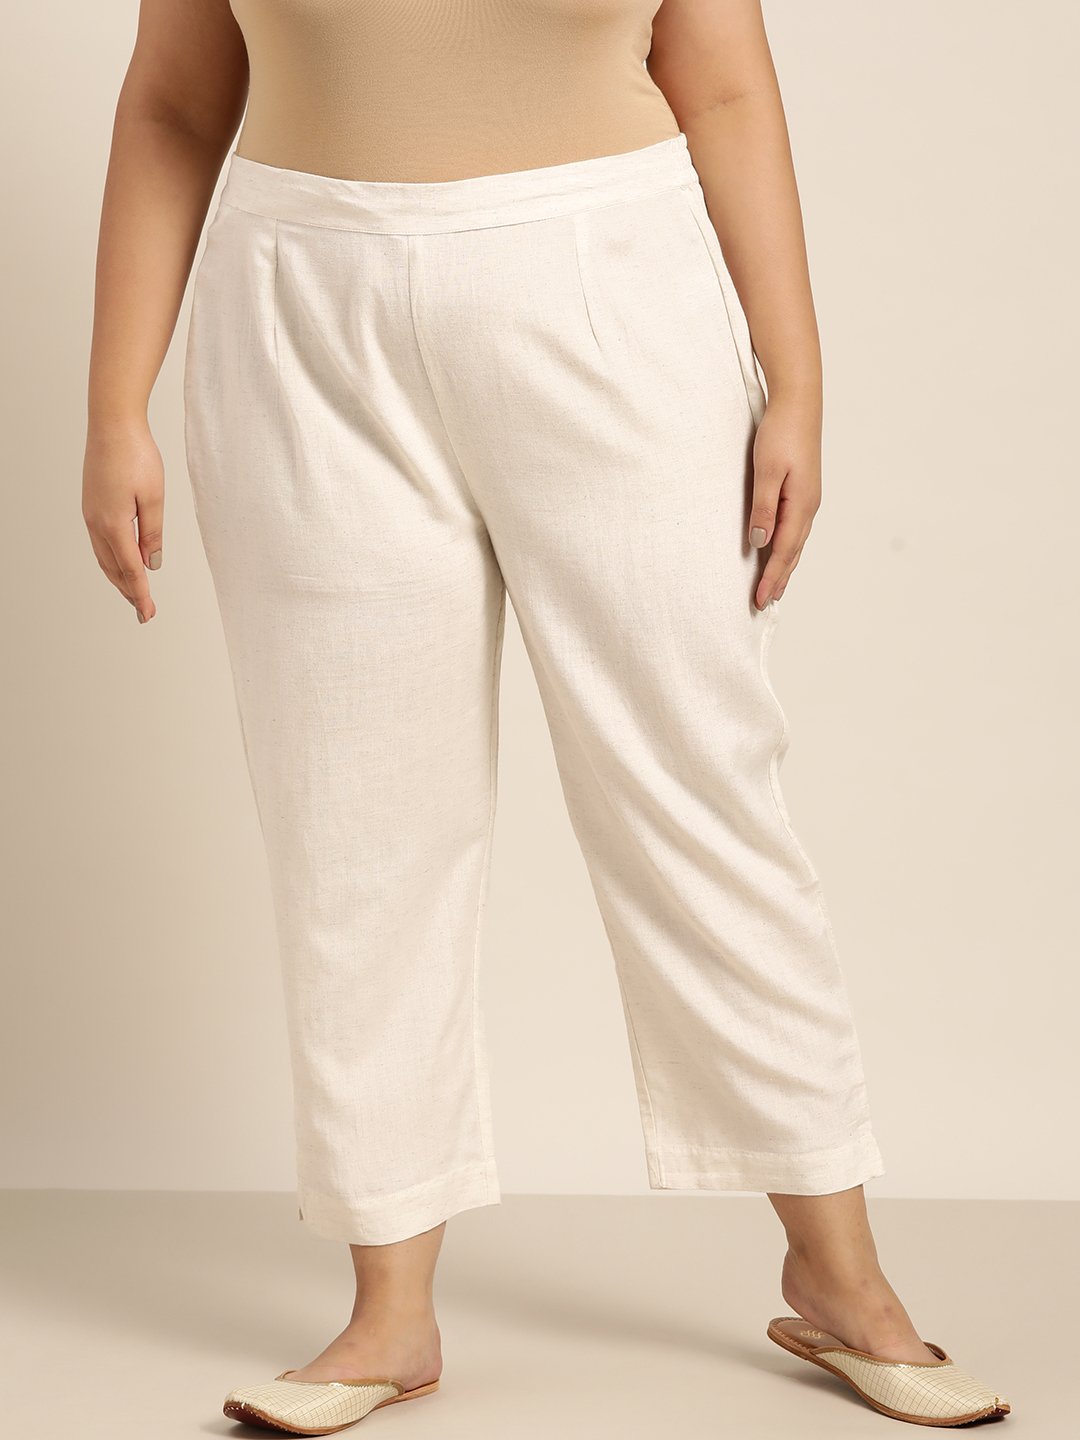 Women's Ivory Rayon Solid Straight Pants - Juniper